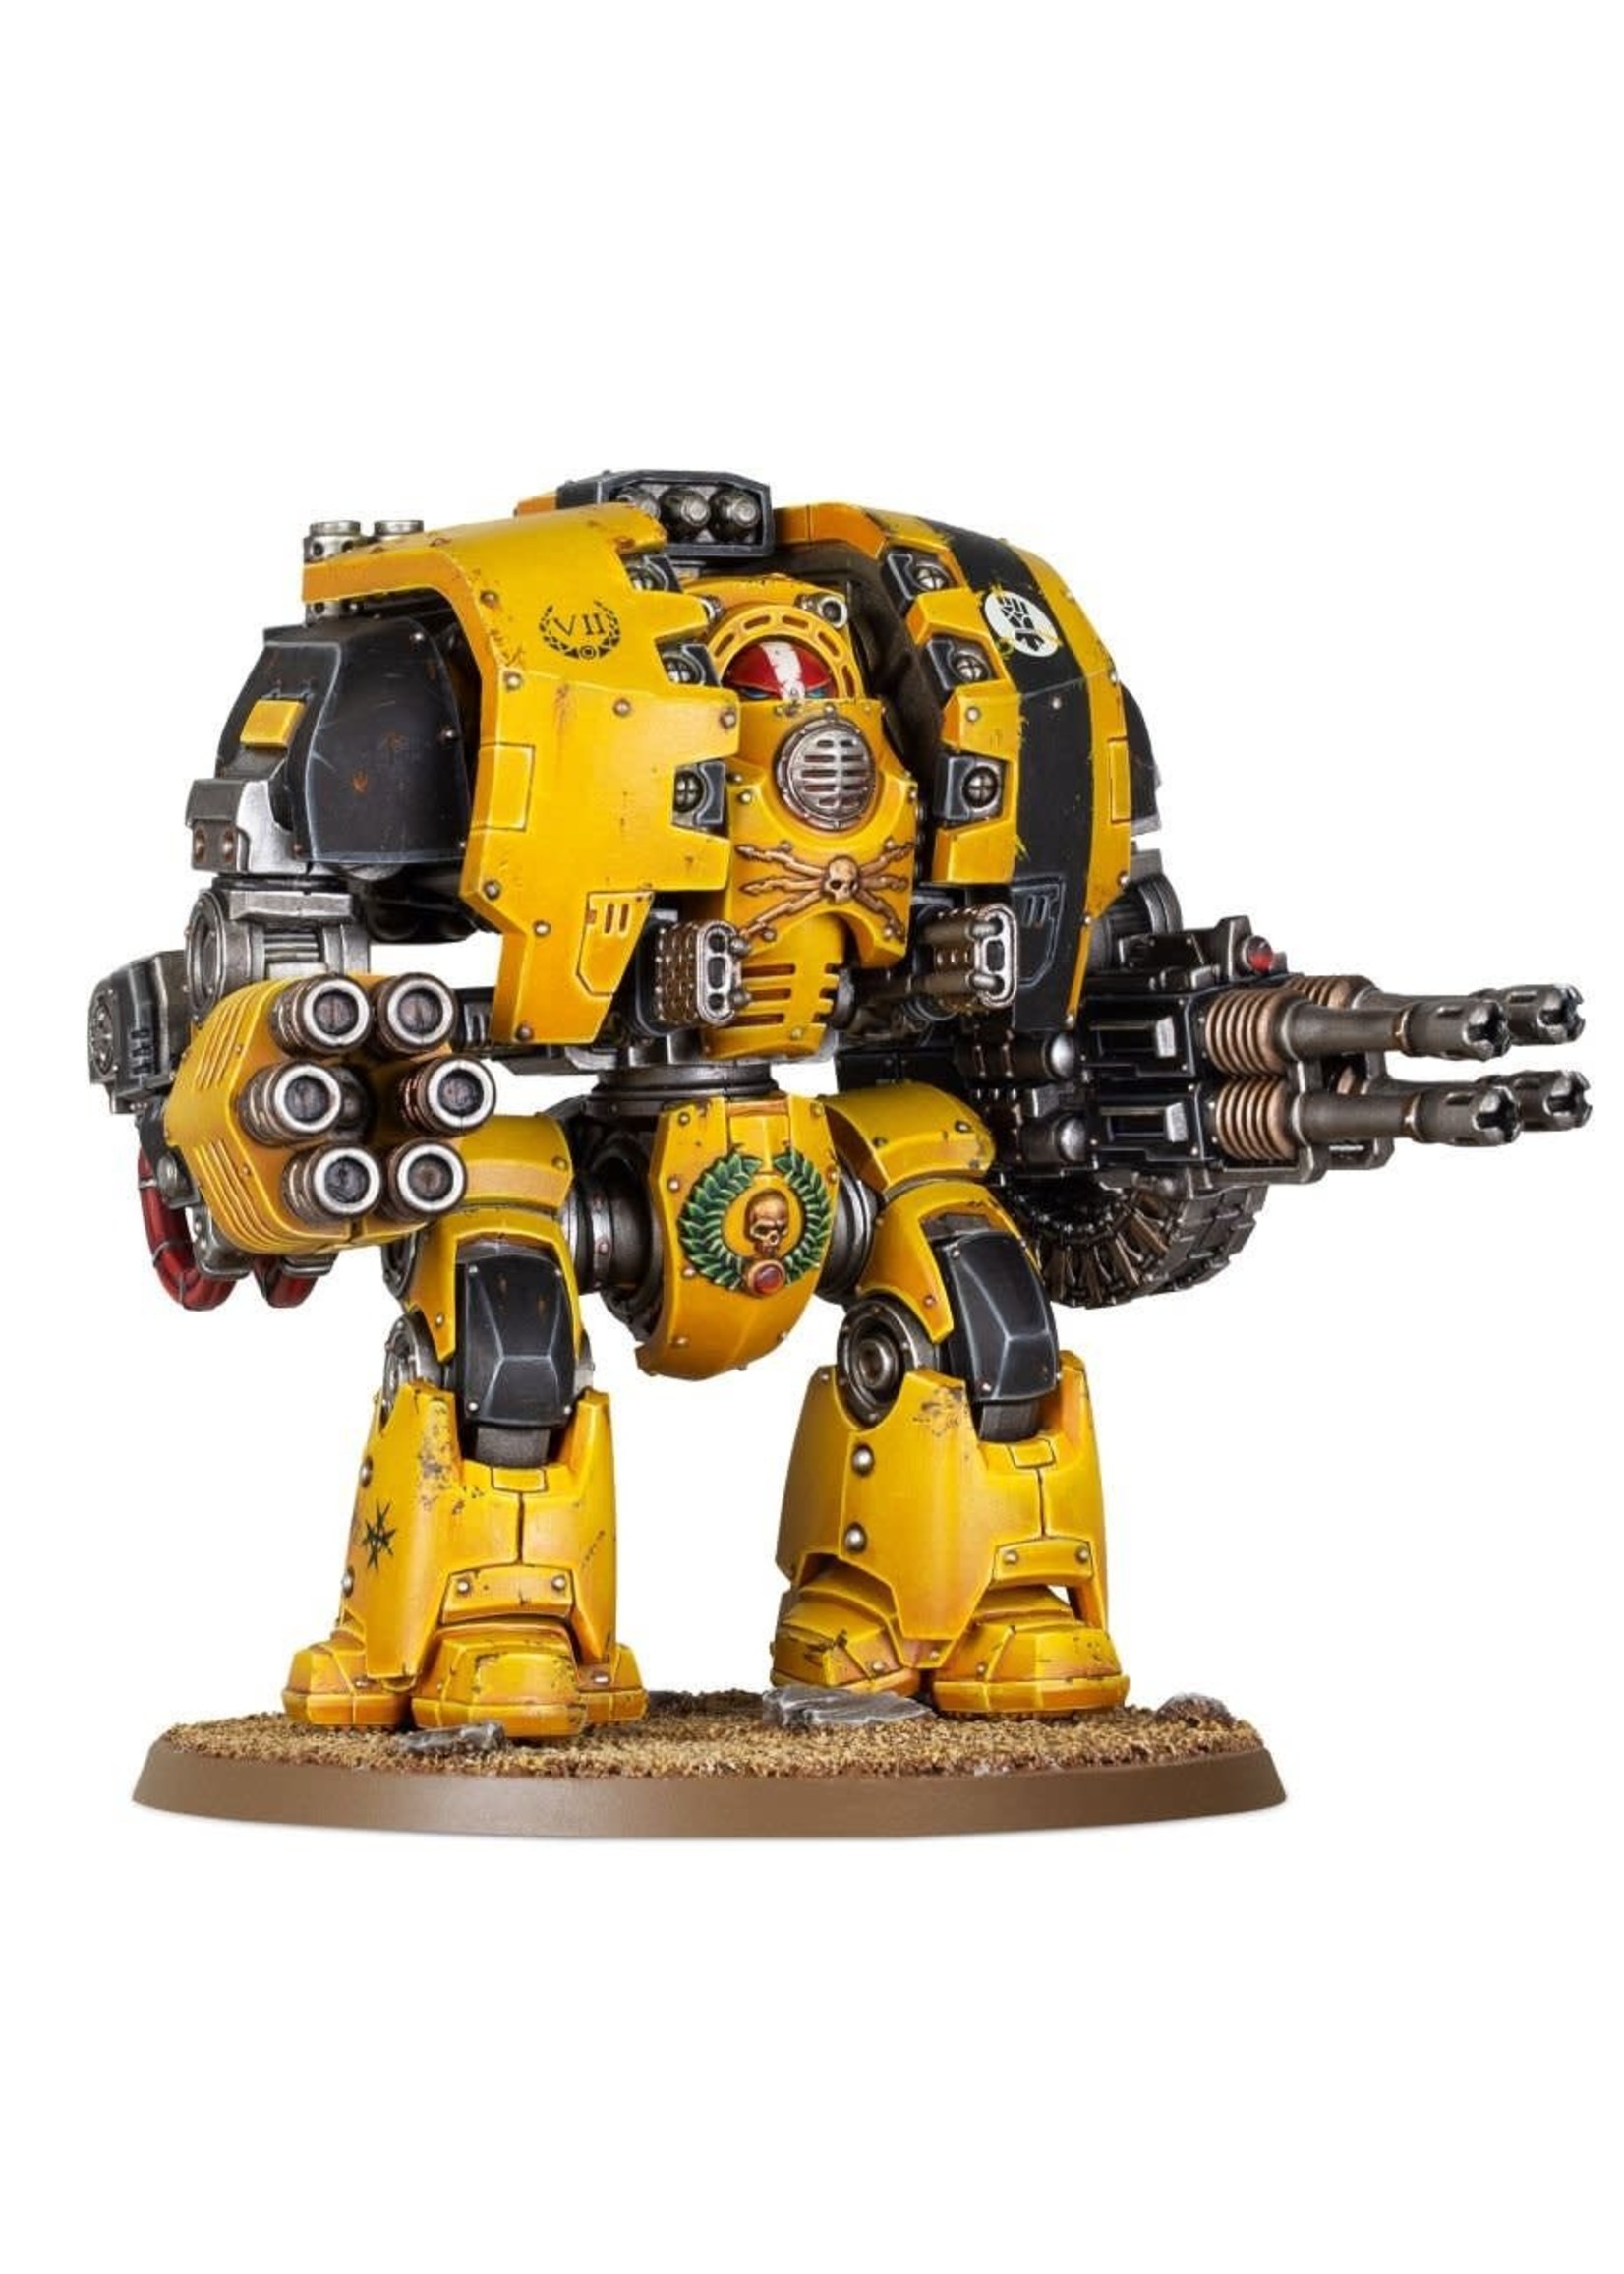 Games Workshop The Horus Heresy - Leviathan Siege Dreadnought w/ Ranged Weapons